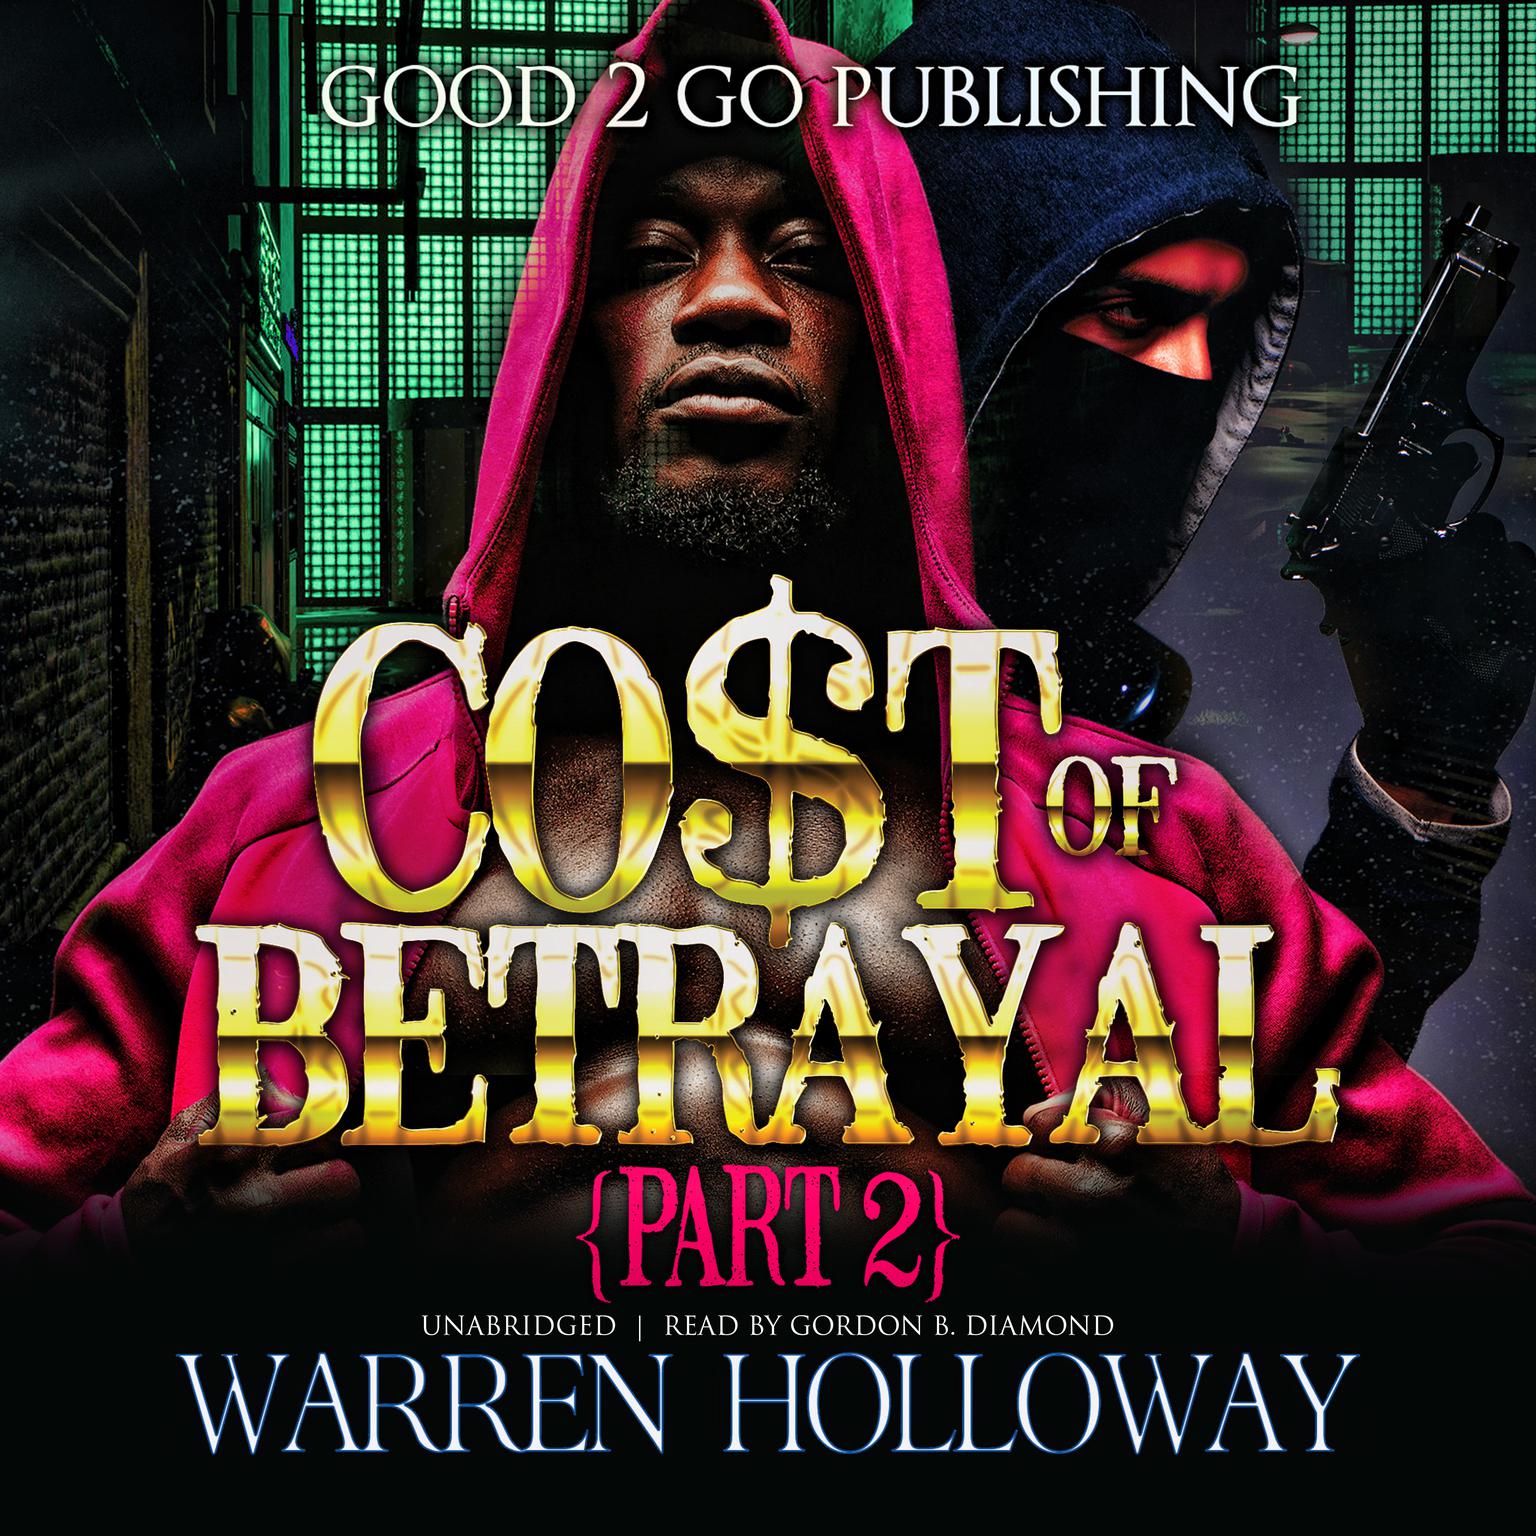 The Cost of Betrayal, Part II Audiobook, by Warren Holloway